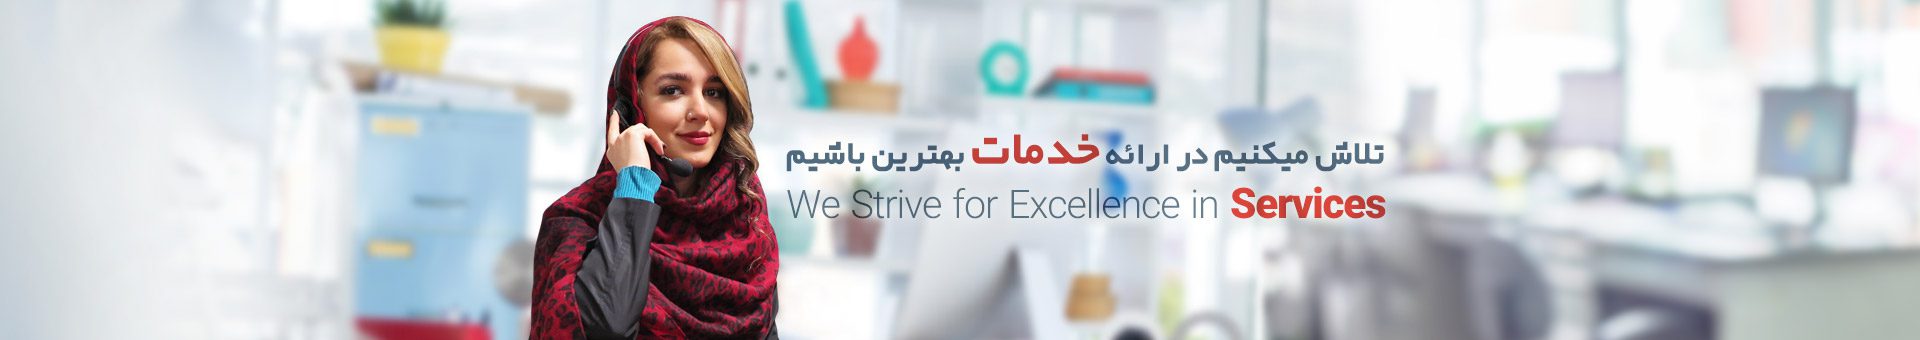 we strive for excellence in servisess